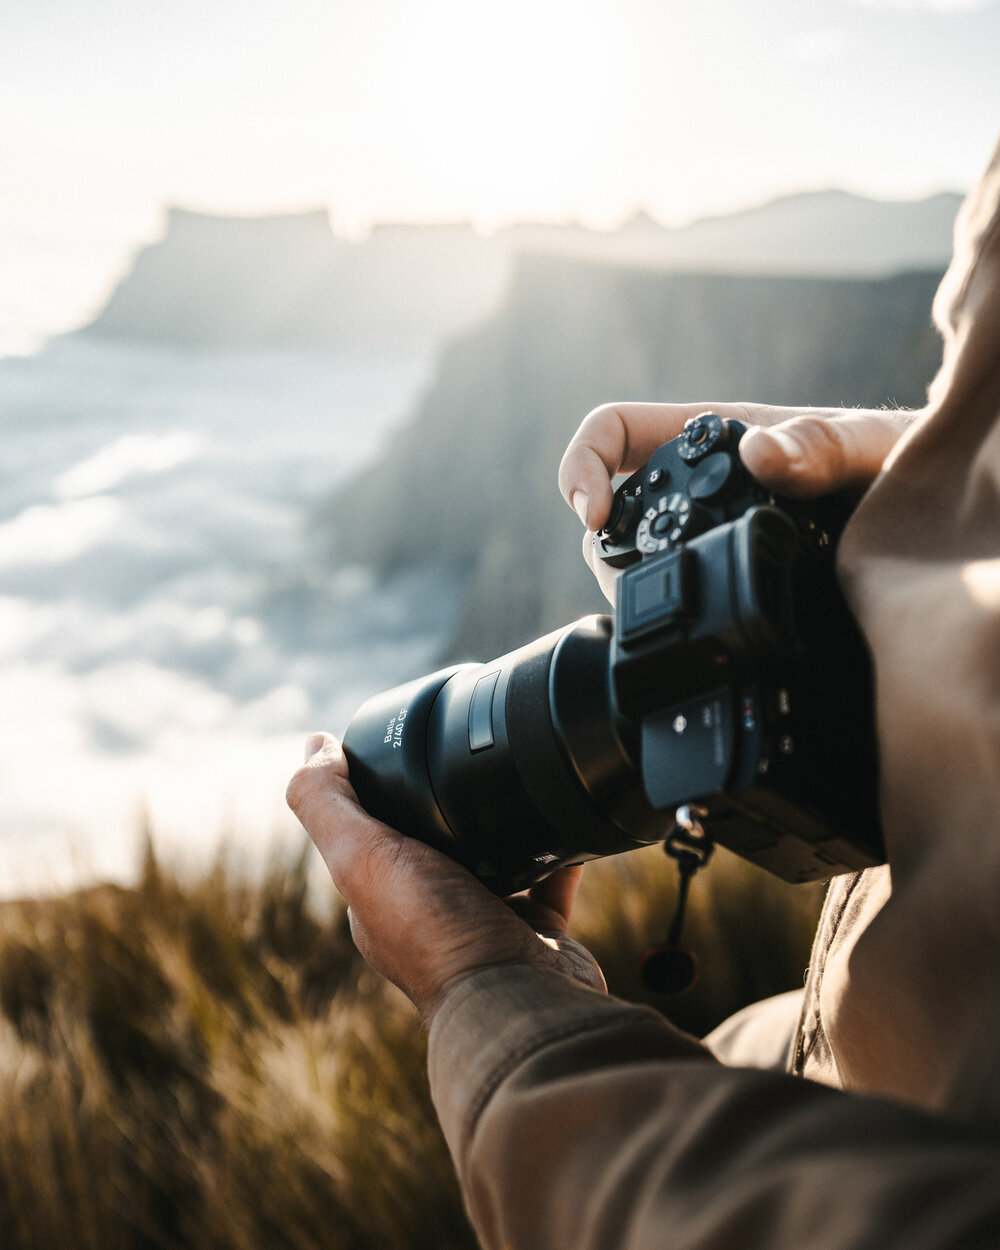 Life with the Zeiss Batis range. — JACK HARDING PHOTOGRAPHY